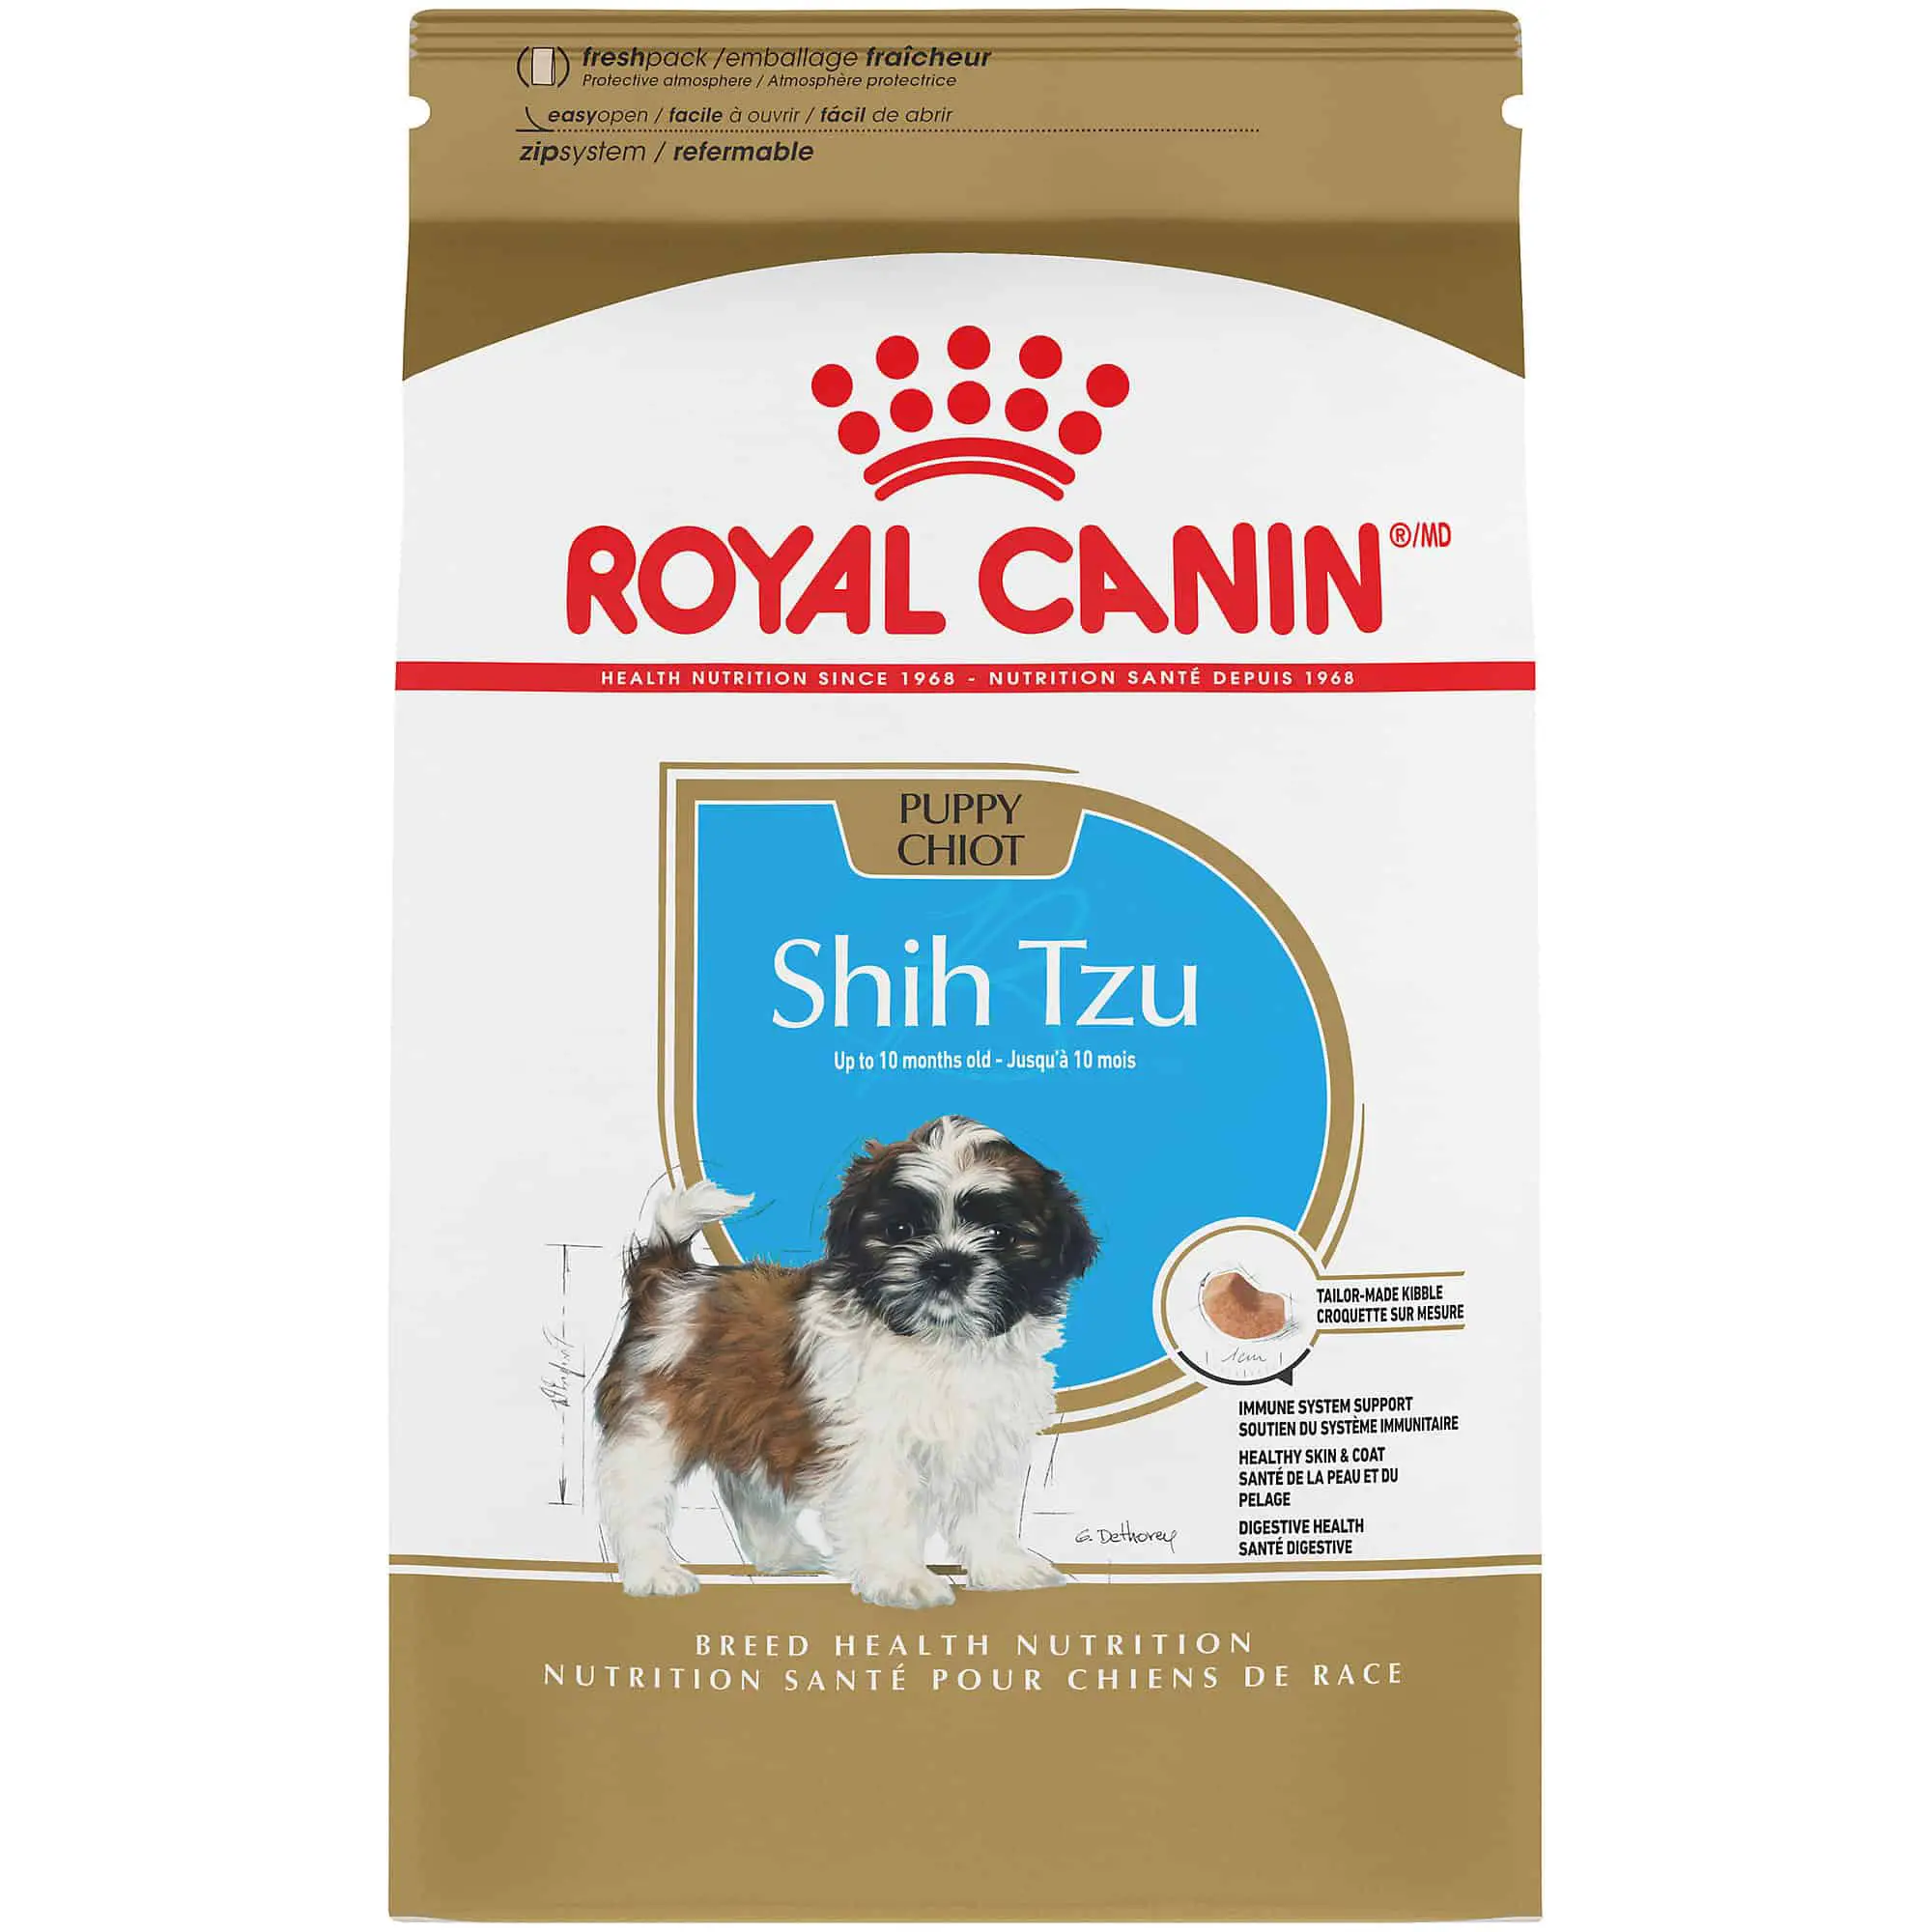 What is the Best Dry Dog Food for Shih Tzu?